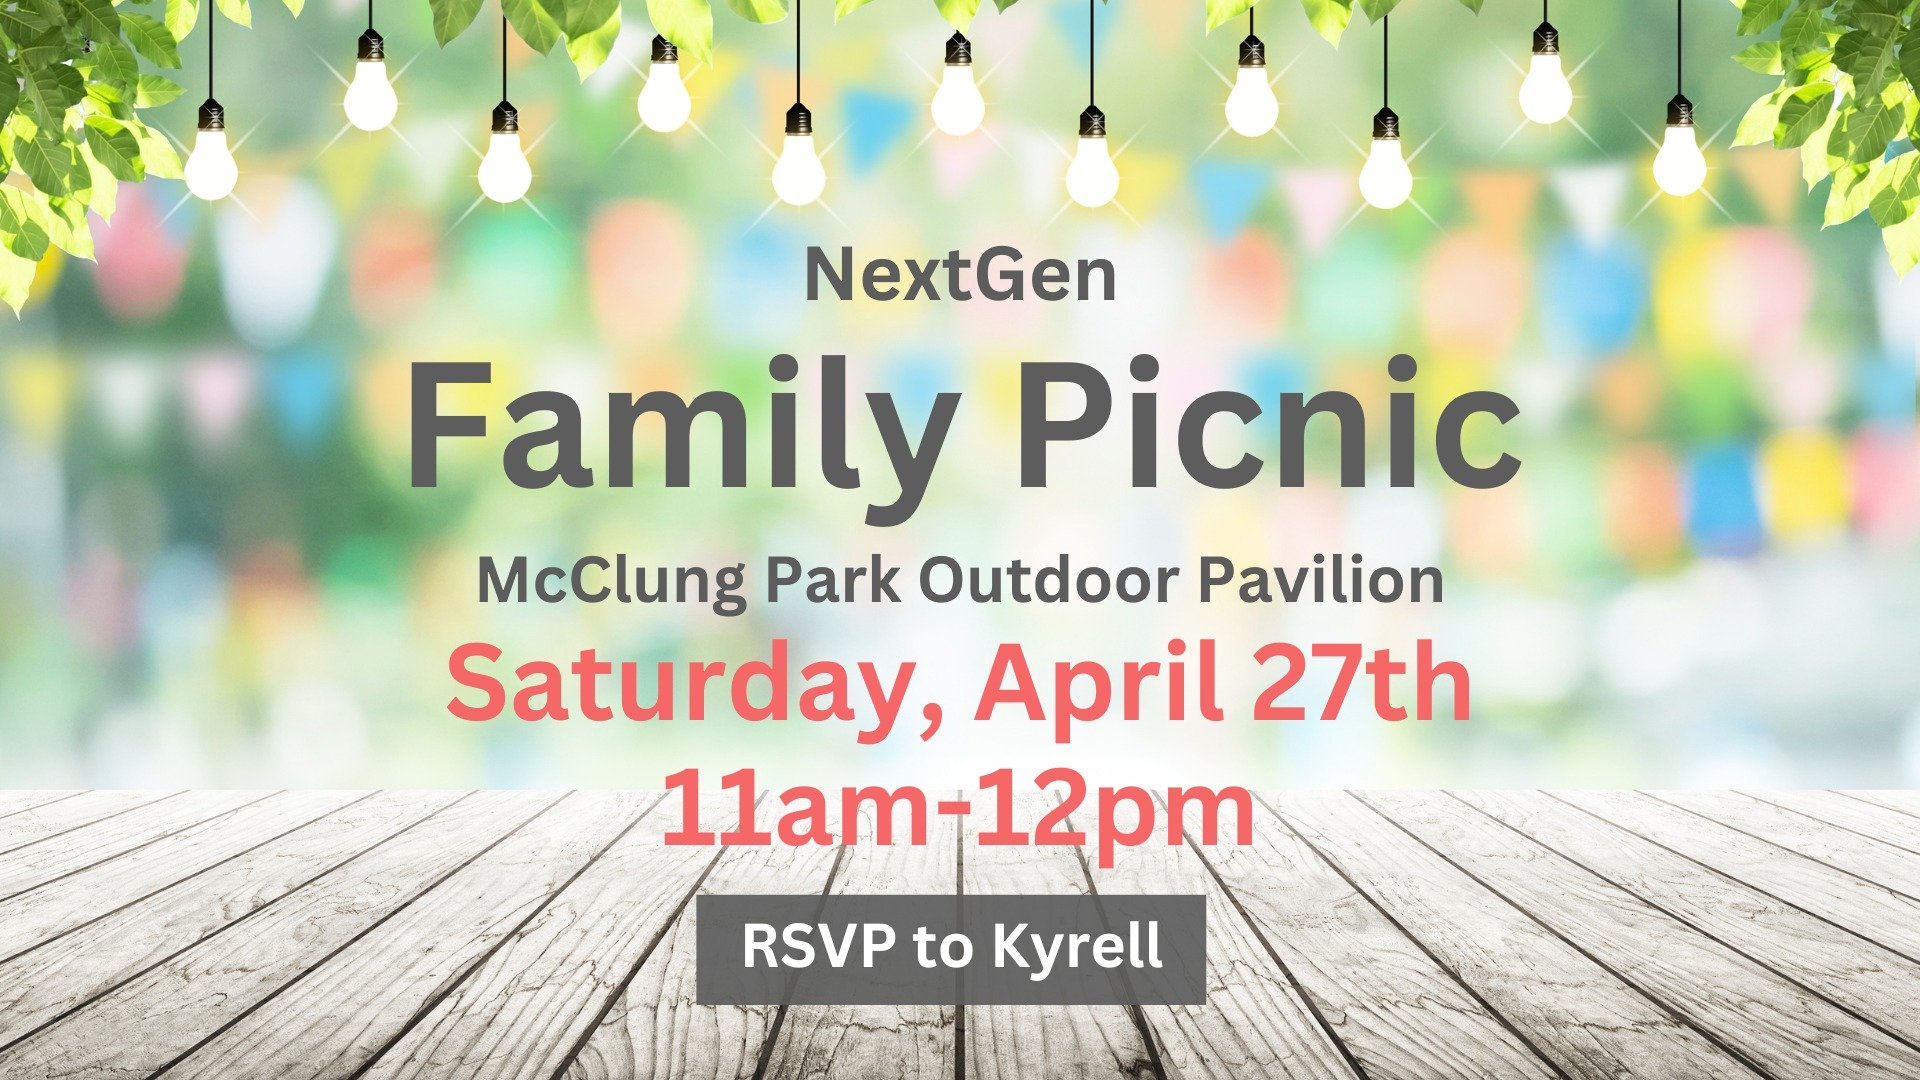 💚All NextGen families are invited to join us for a picnic at McClung Park Outdoor Pavilion on Saturday, April 27th from 11am - 12pm.

🌭Please bring a side to share. Church will provide hot dogs, burgers and drinks.

✅RSVP to Kyrell / 573-832-3485

